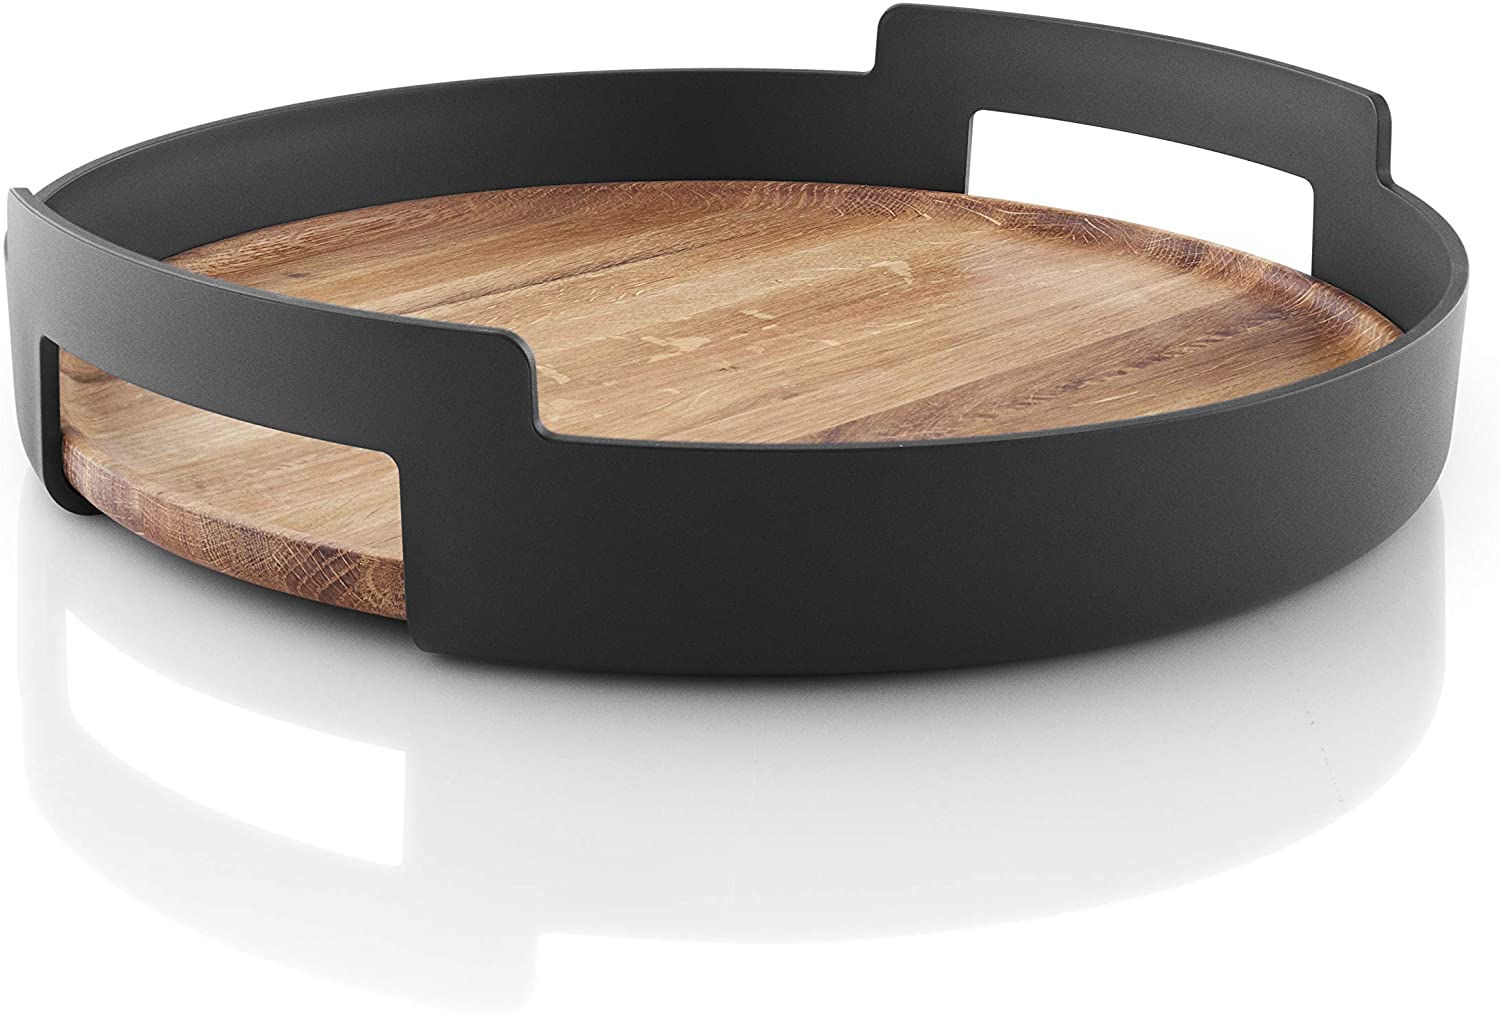 EVA SOLO Nordic Kitchen Serving Tray, Simple and Timeless Design, Black